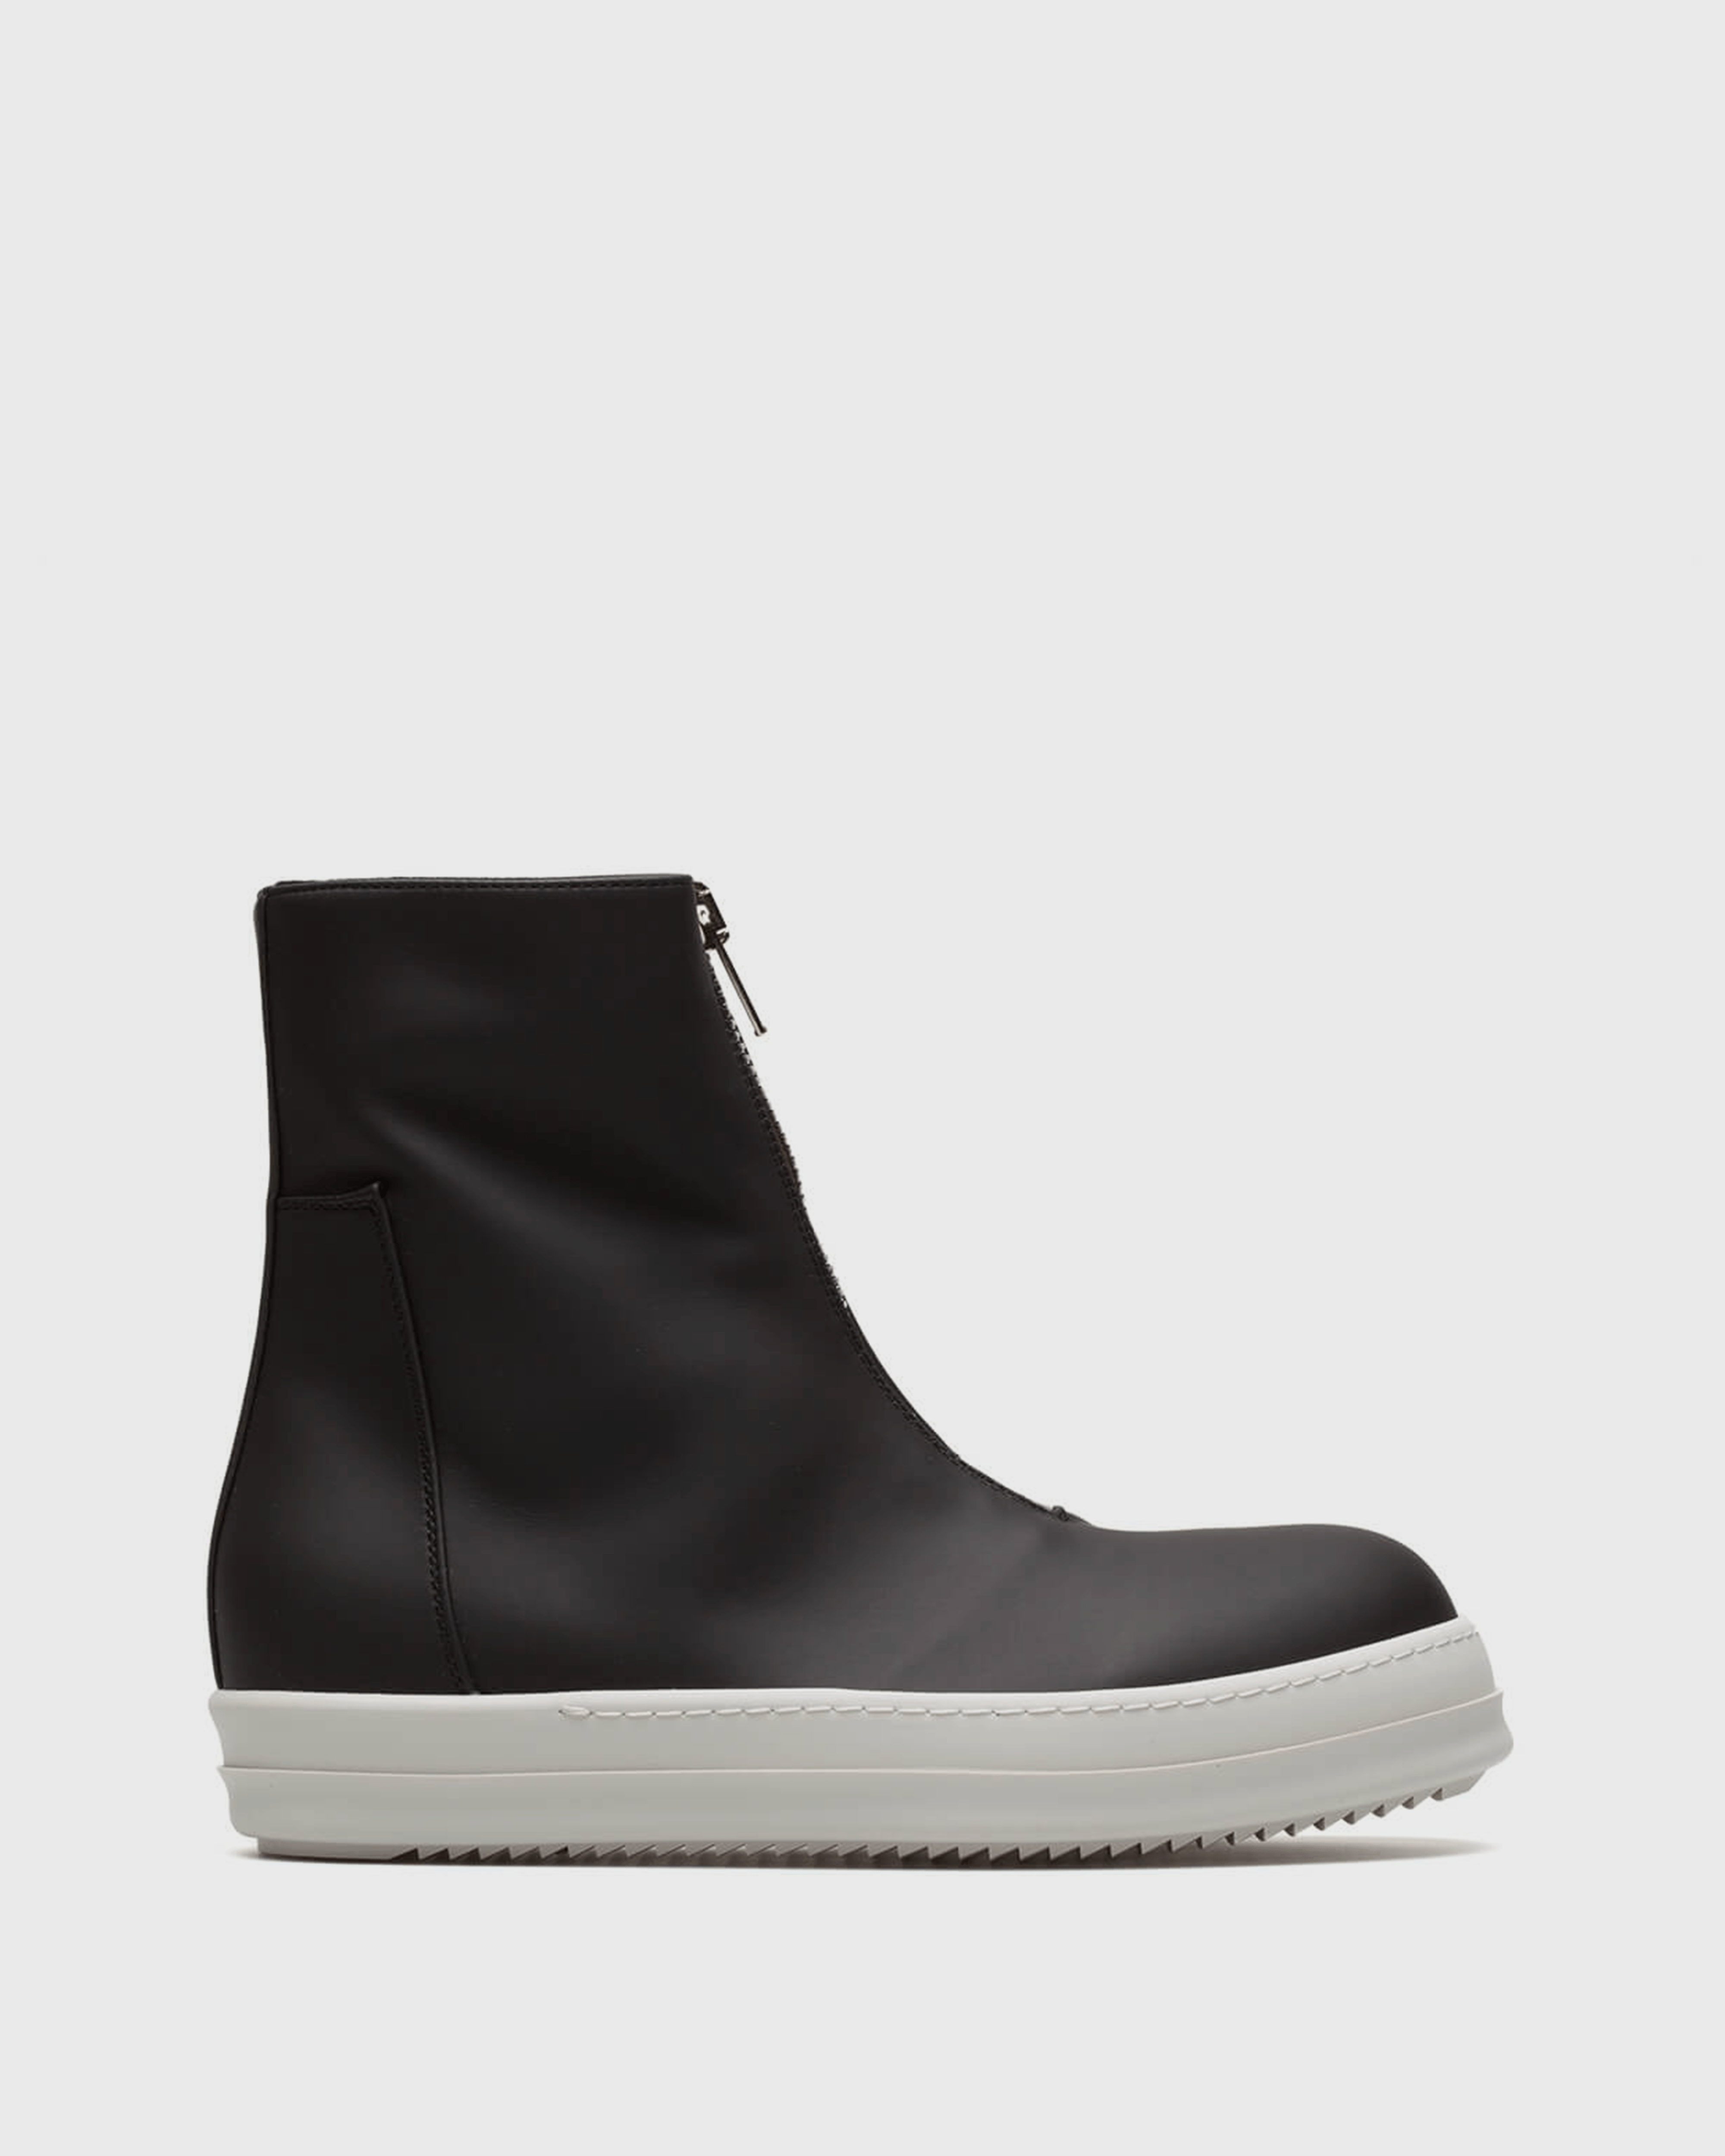 Front Zip Sneaker in Black and White – SVRN